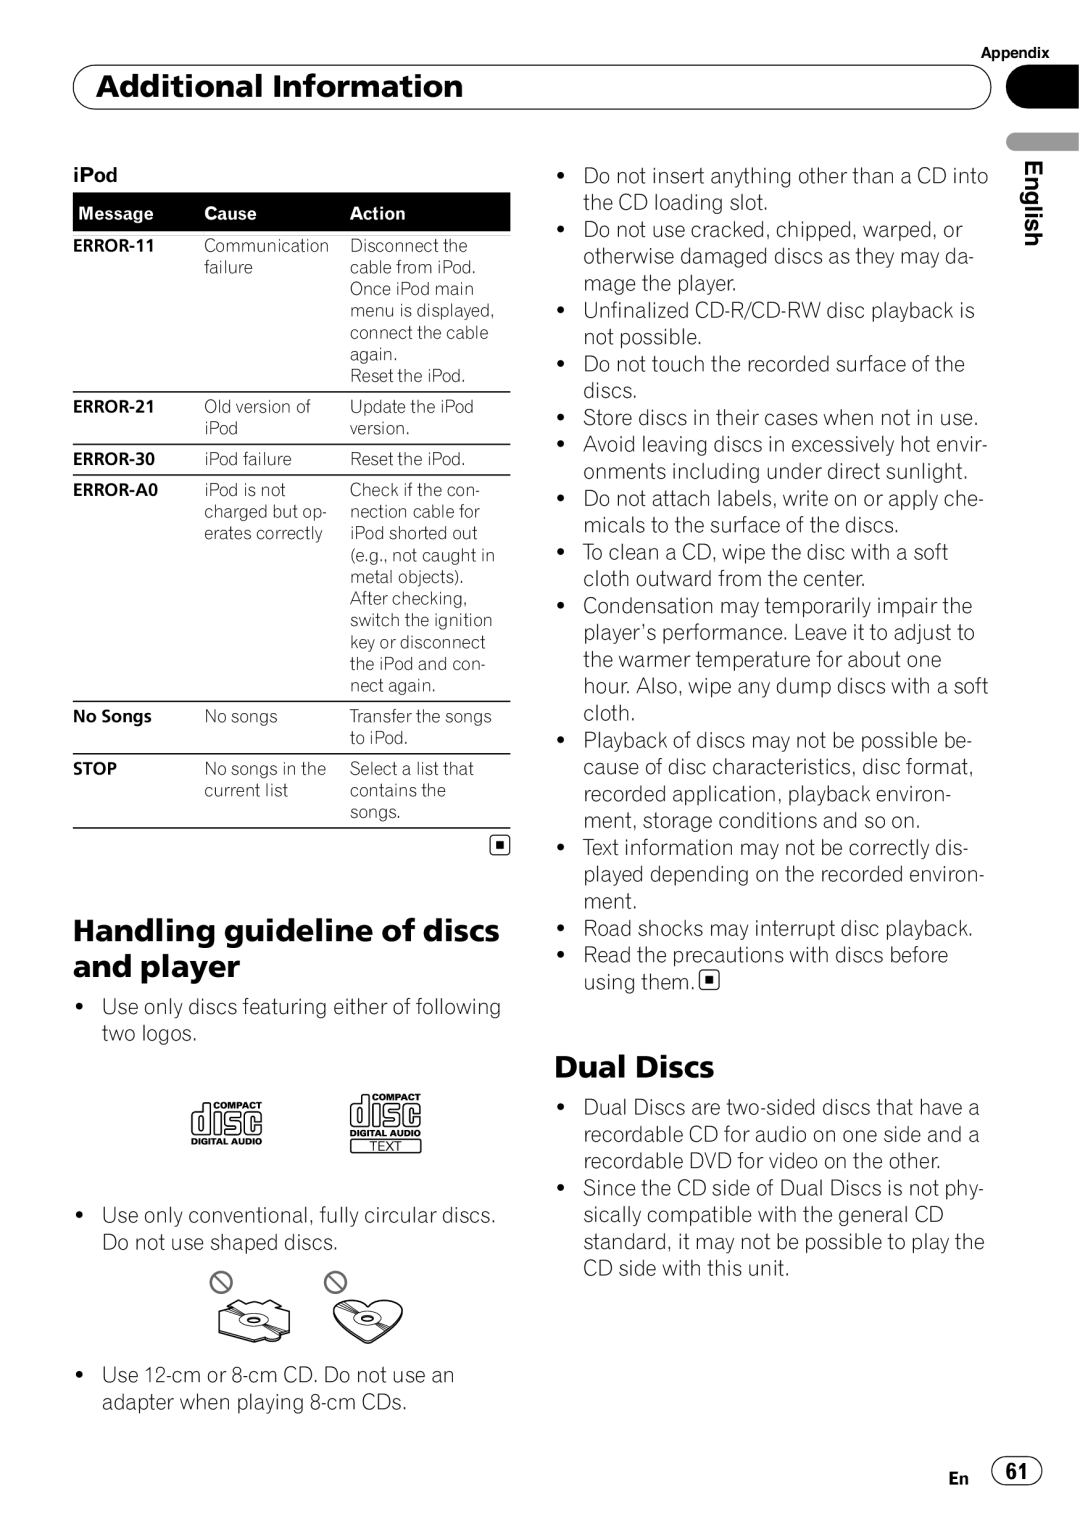 Pioneer DEH-P7900UB operation manual Handling guideline of discs and player, Dual Discs, Additional Information, English 